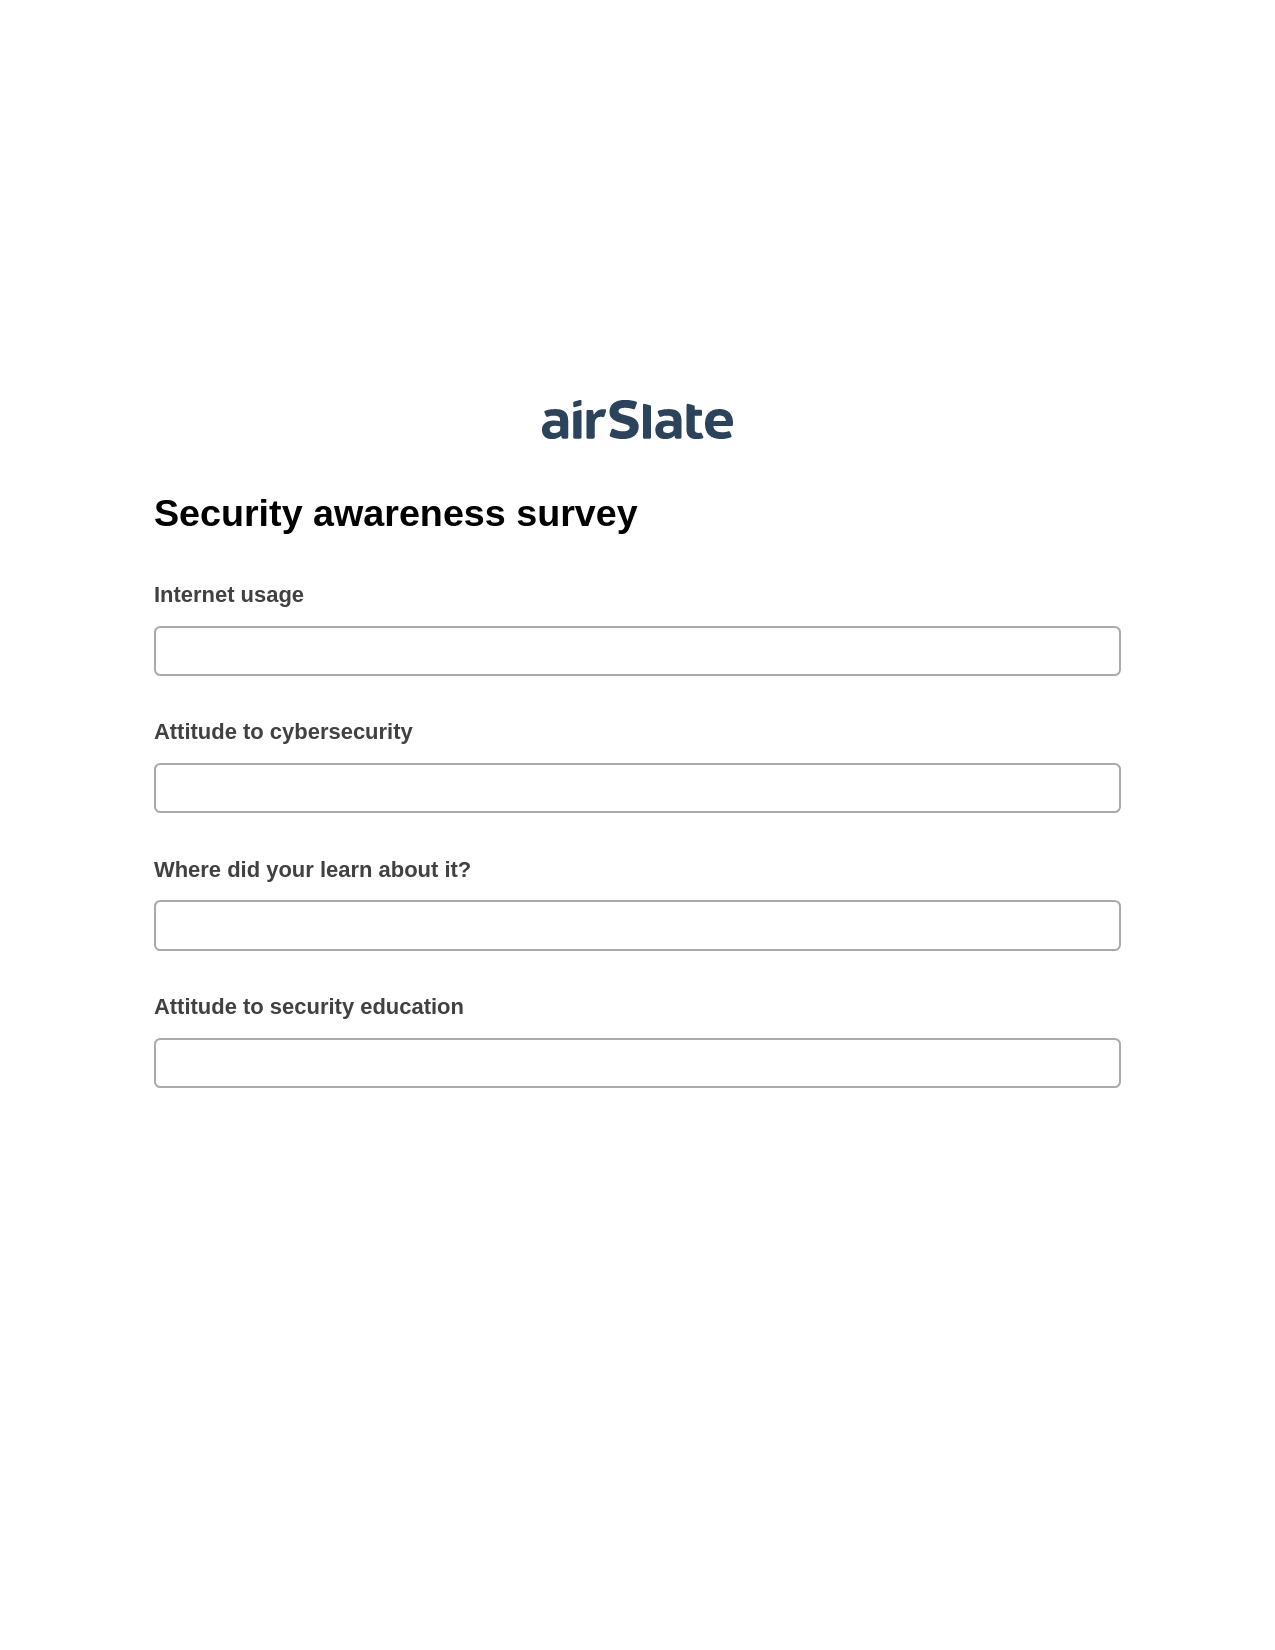 Multirole Security awareness survey Pre-fill from MS Dynamics 365 Records DEPRECATED, Jira Bot, Export to Smartsheet